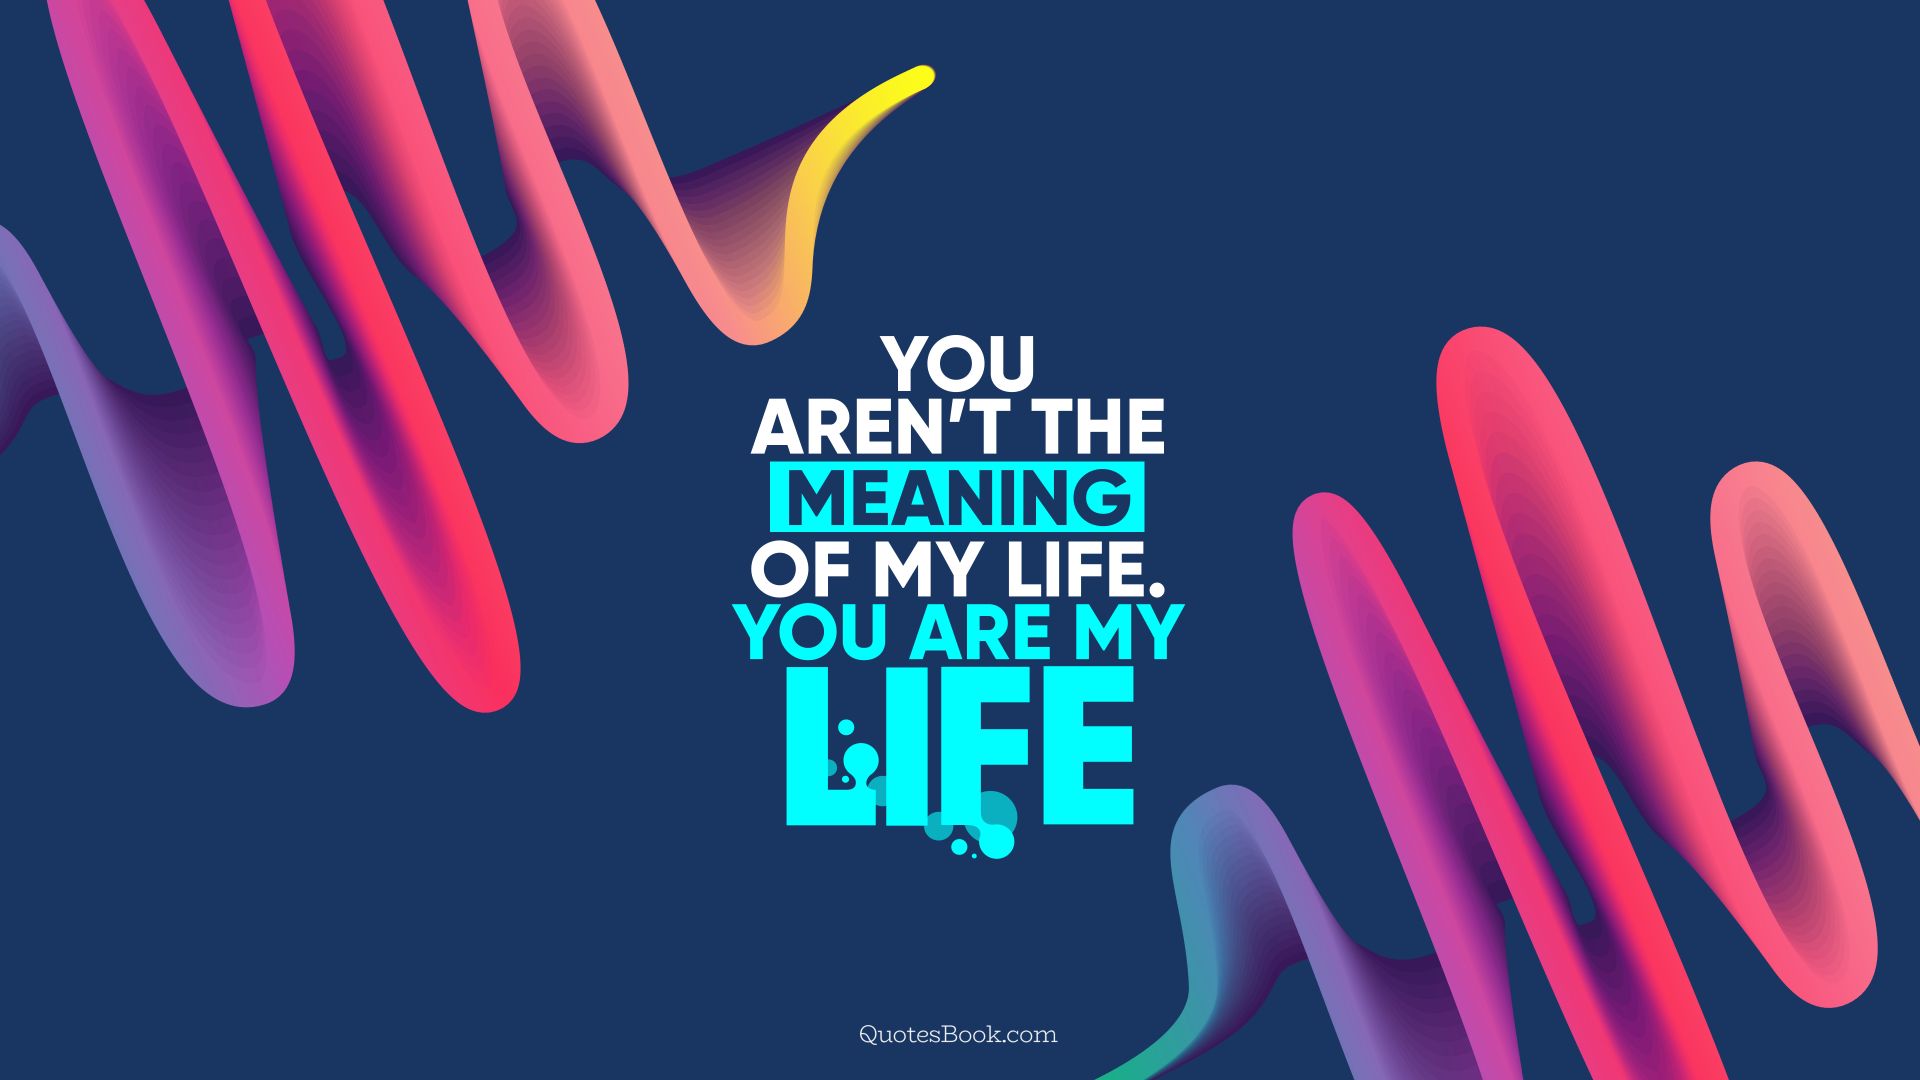 You aren’t the meaning of my life. You are my life. - Quote by QuotesBook